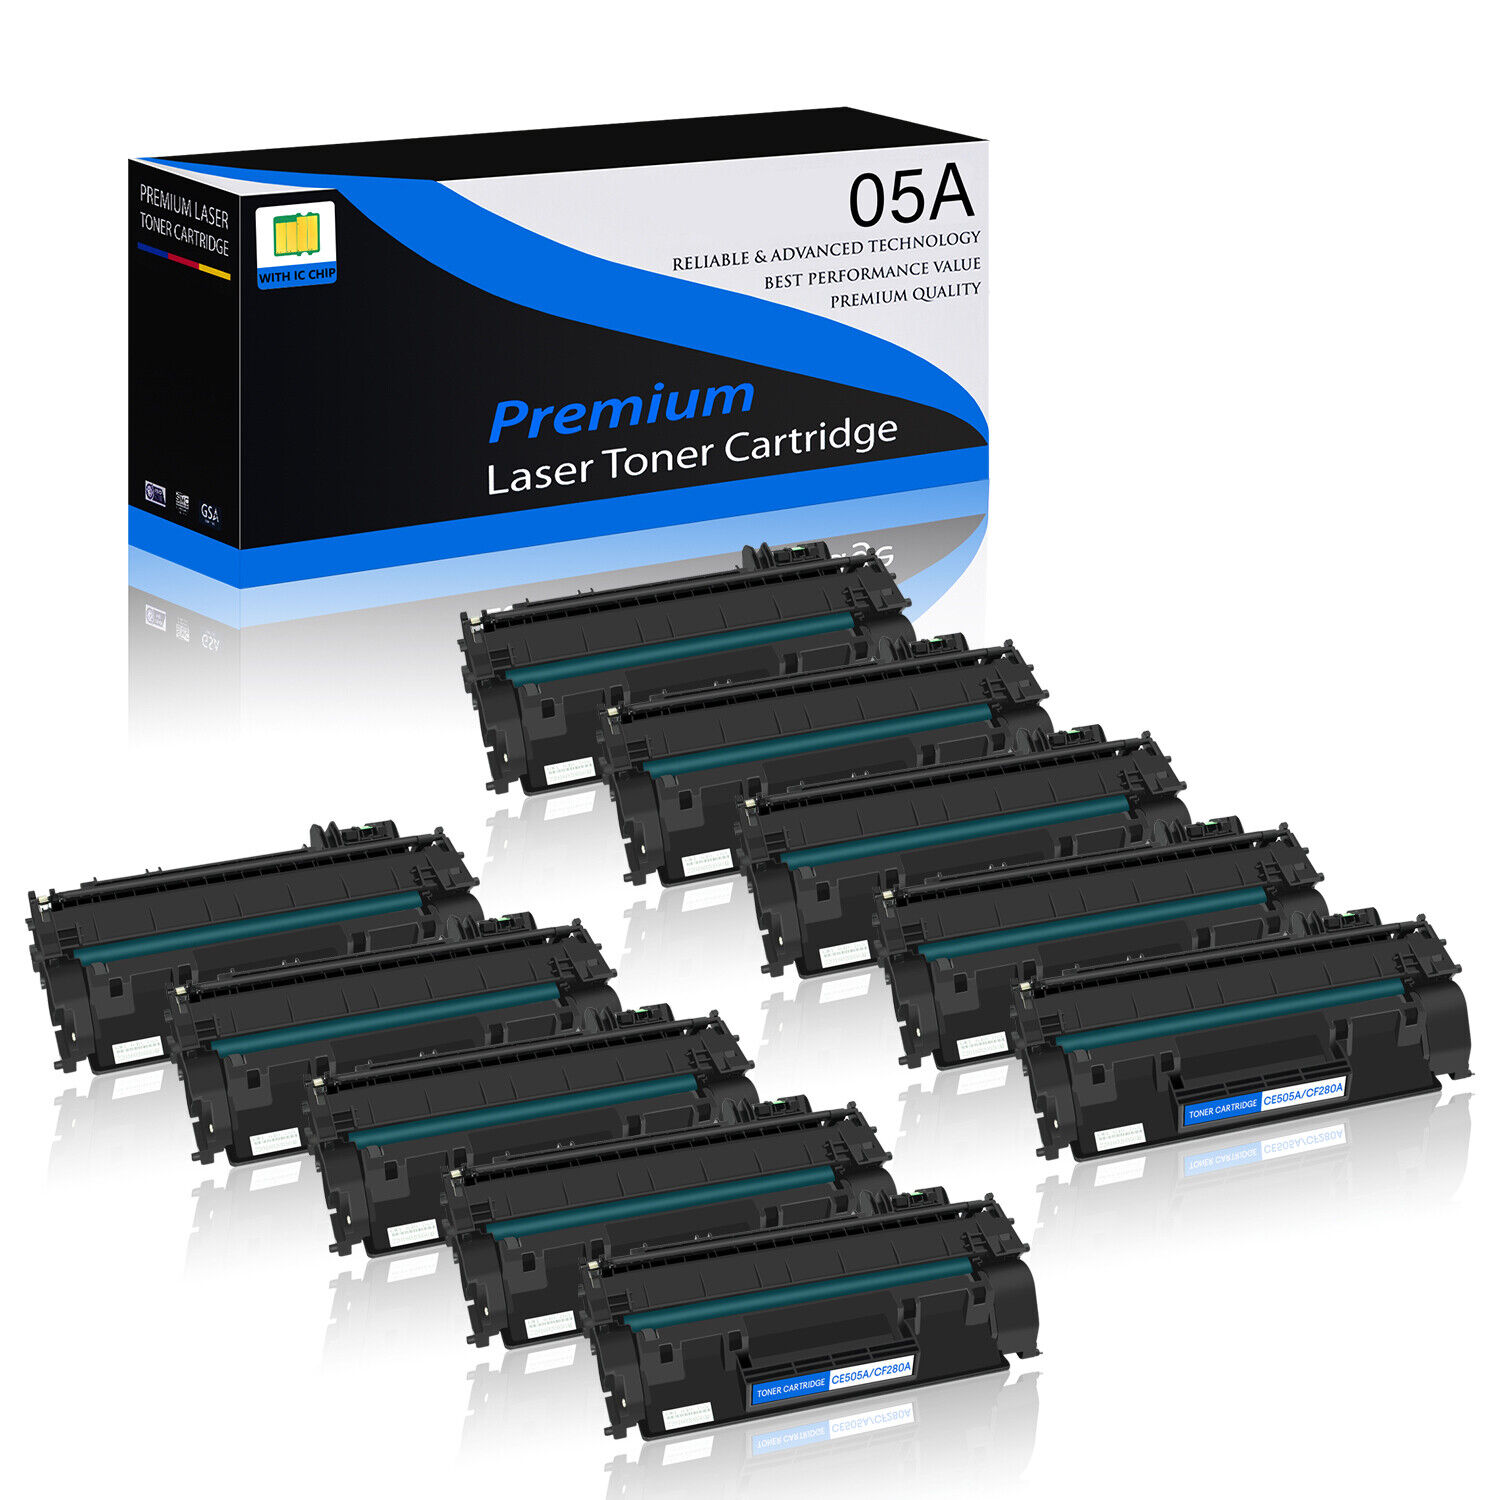 10PK High Yield 05A CE505A Toner Compatible for HP LaserJet P2035 P2035n P2055dn